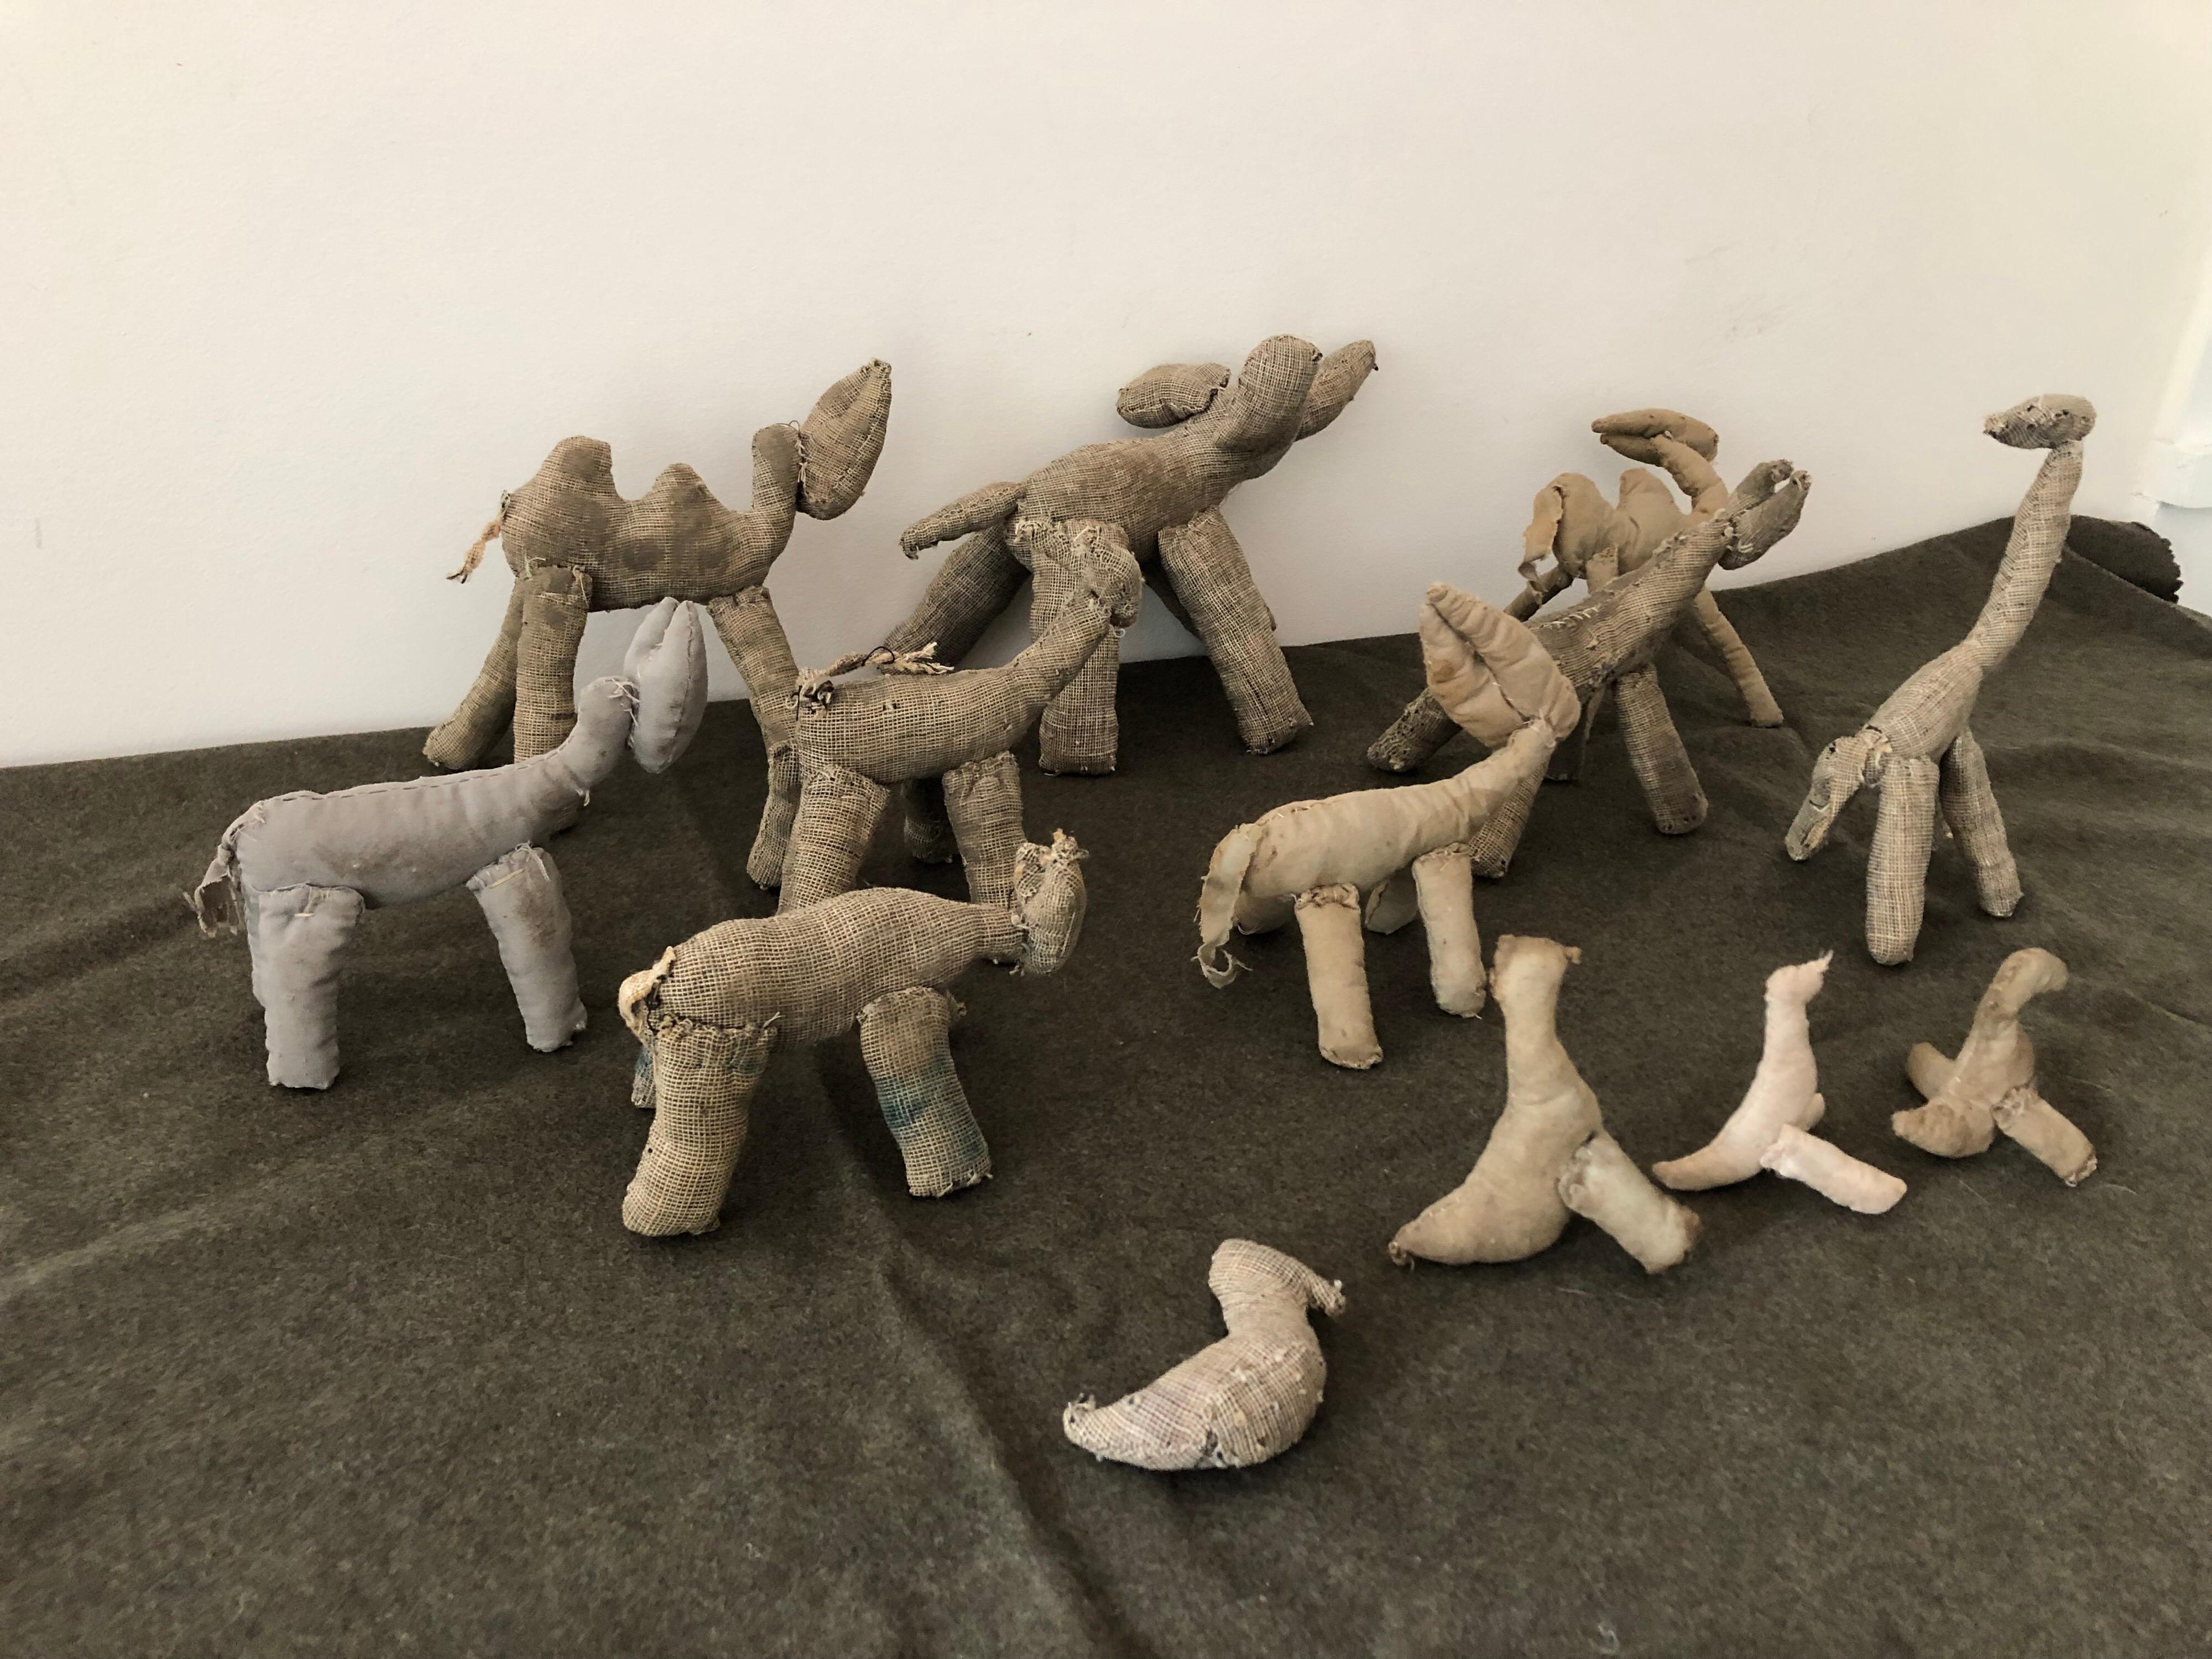 A collection of thirteen mid-19th century Amish stuffed cloth toys. Featuring various cattle, elephant, zebra, camel, ducks, and ducks. Excellent decorative piece. Largest measures 6